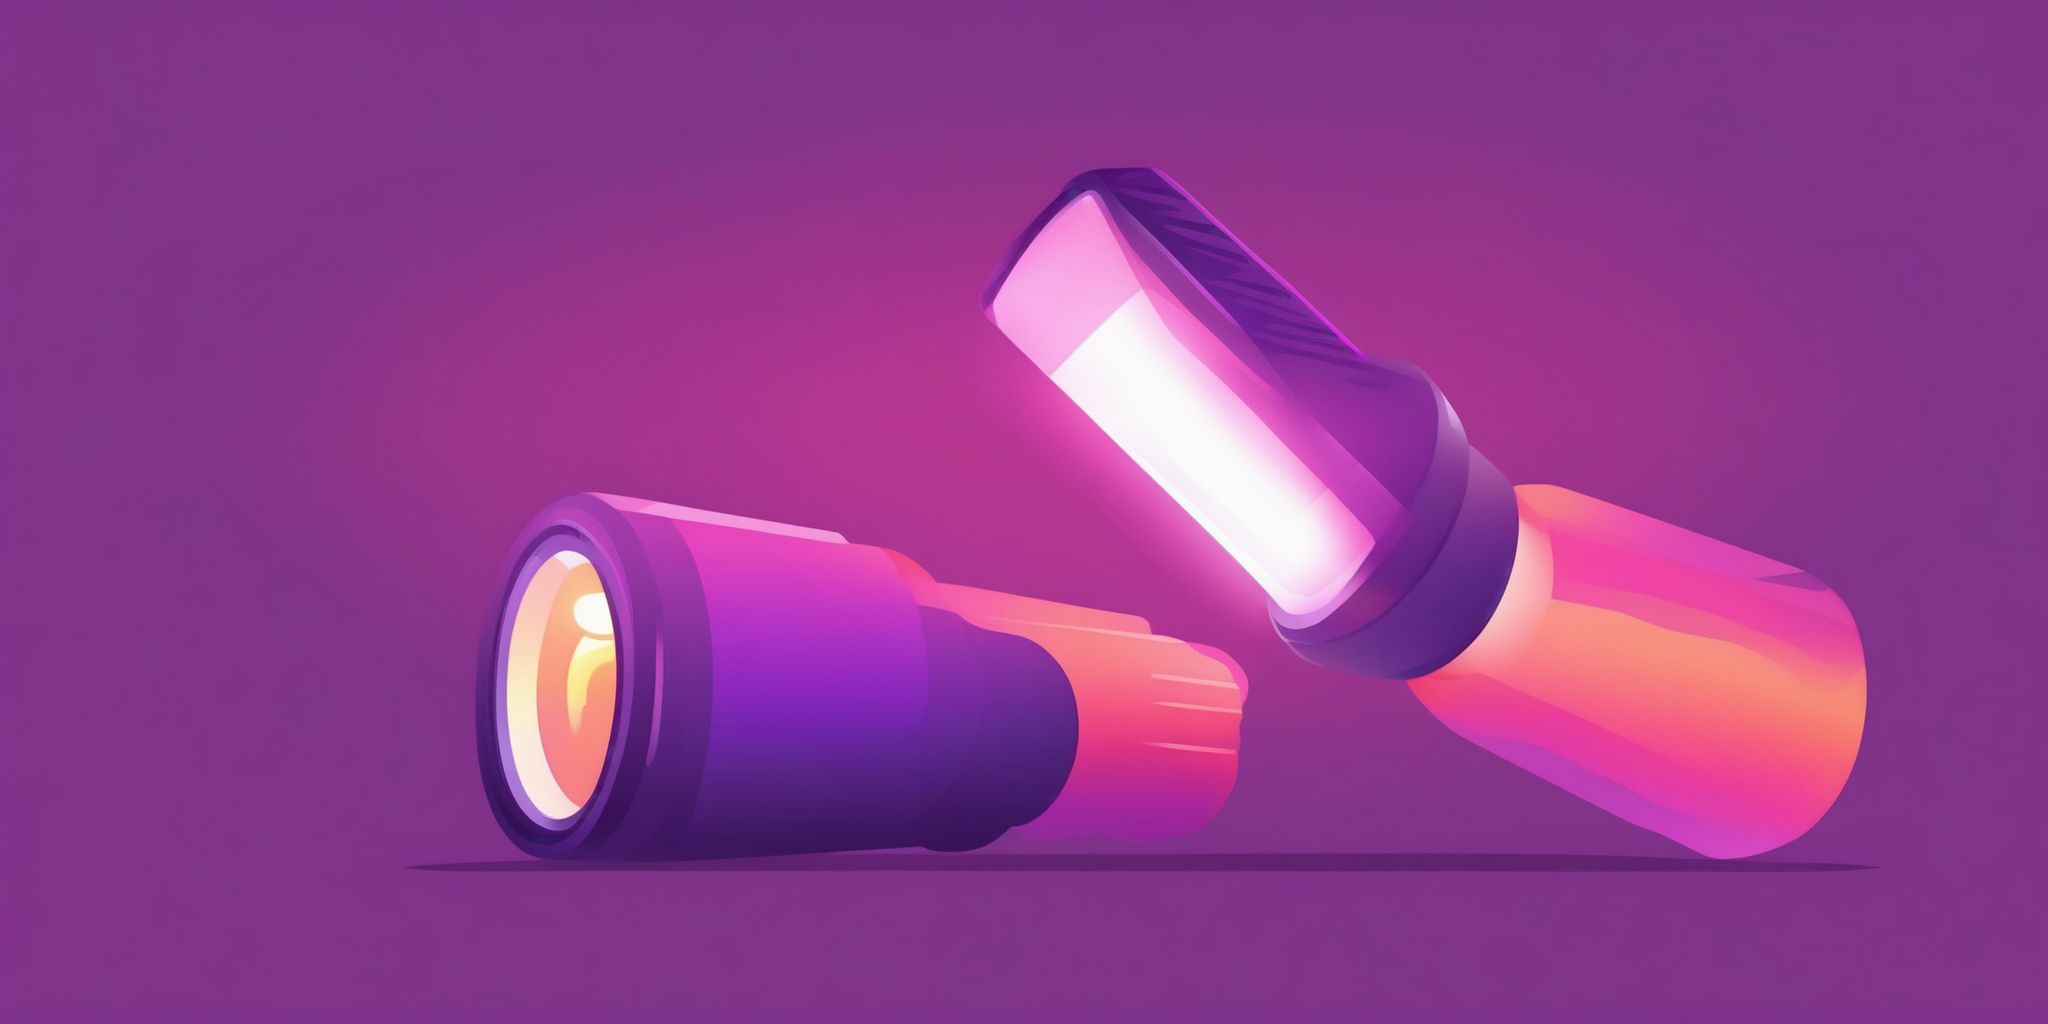 Flashlight in flat illustration style, colorful purple gradient colors